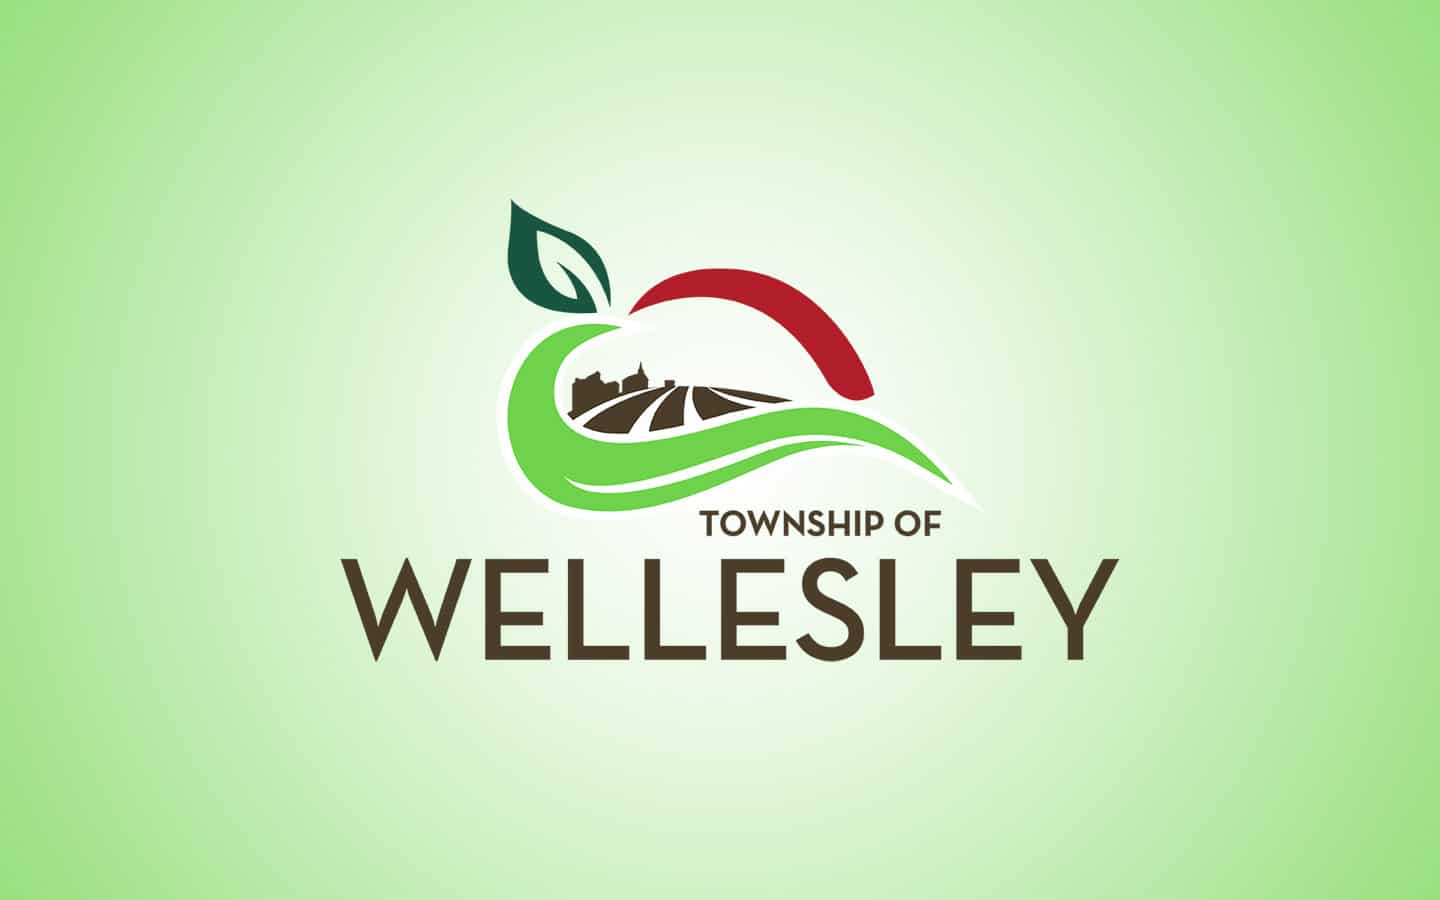 Wellesley looks to extend ticketing powers to tackle illegal parking